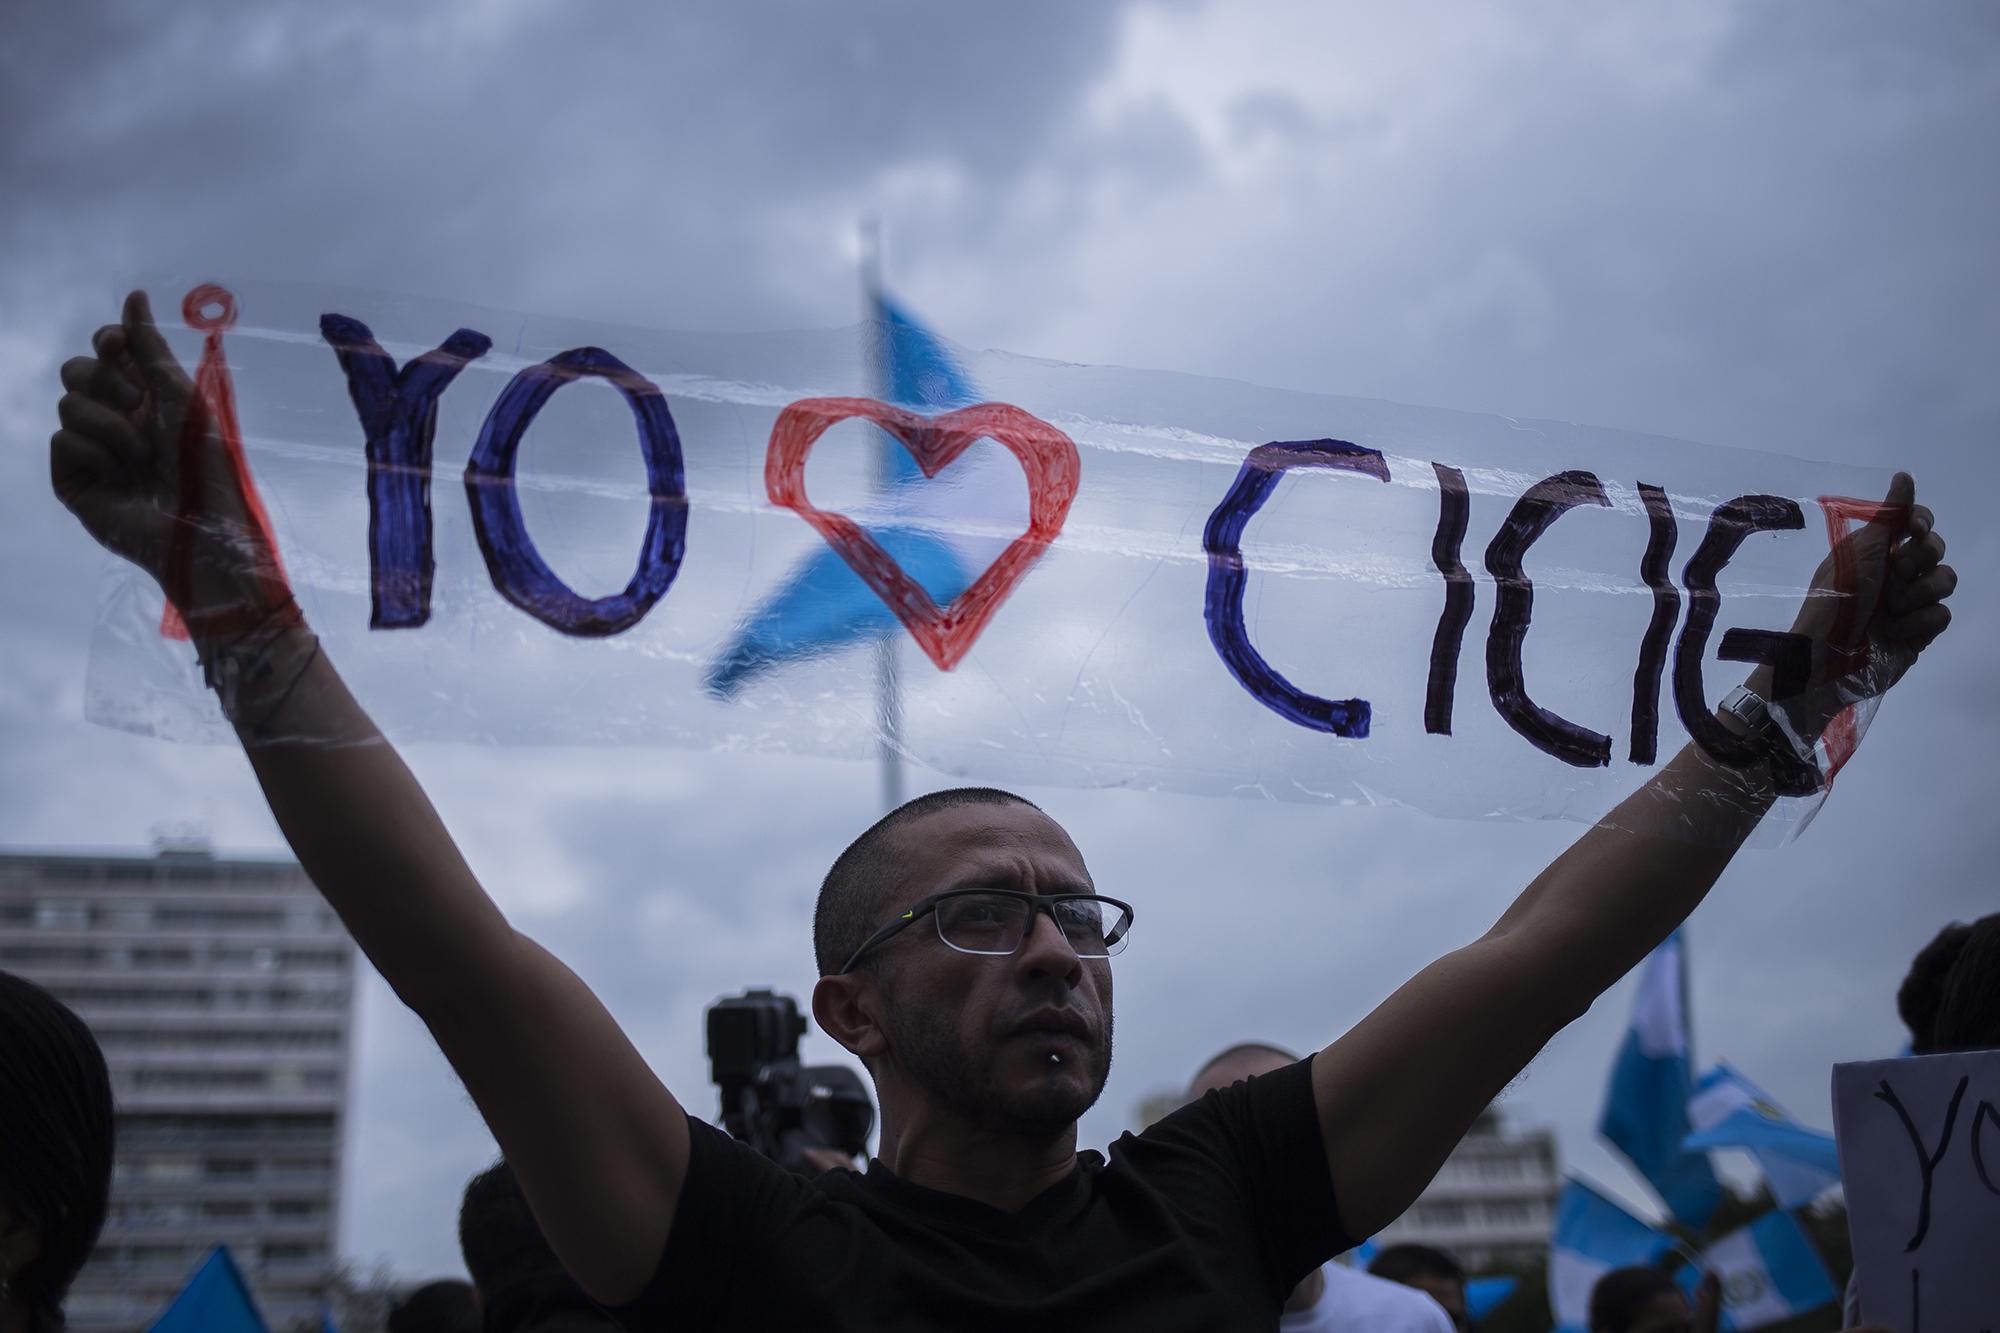 The International Commission against Impunity in Guatemala, or CICIG, had been investigating political corruption in Guatemala for 12 years. People took to the streets in protest of former President Jimmy Morales